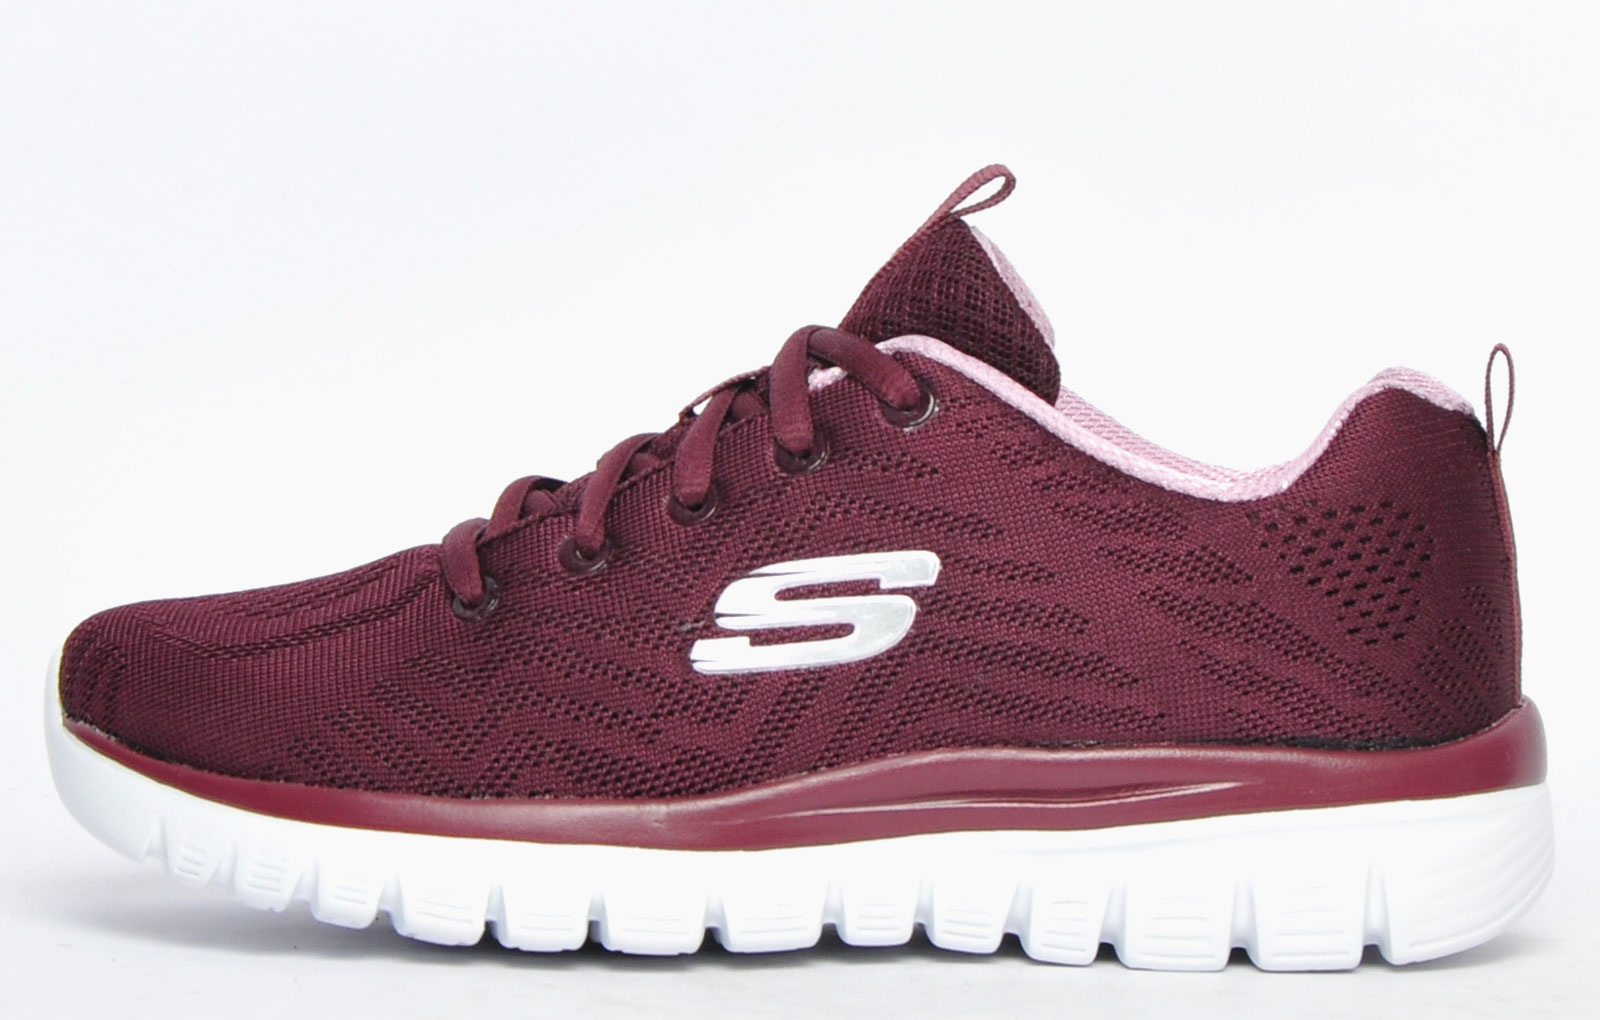 Cheap Skechers for Women UK – Free UK Delivery | Express